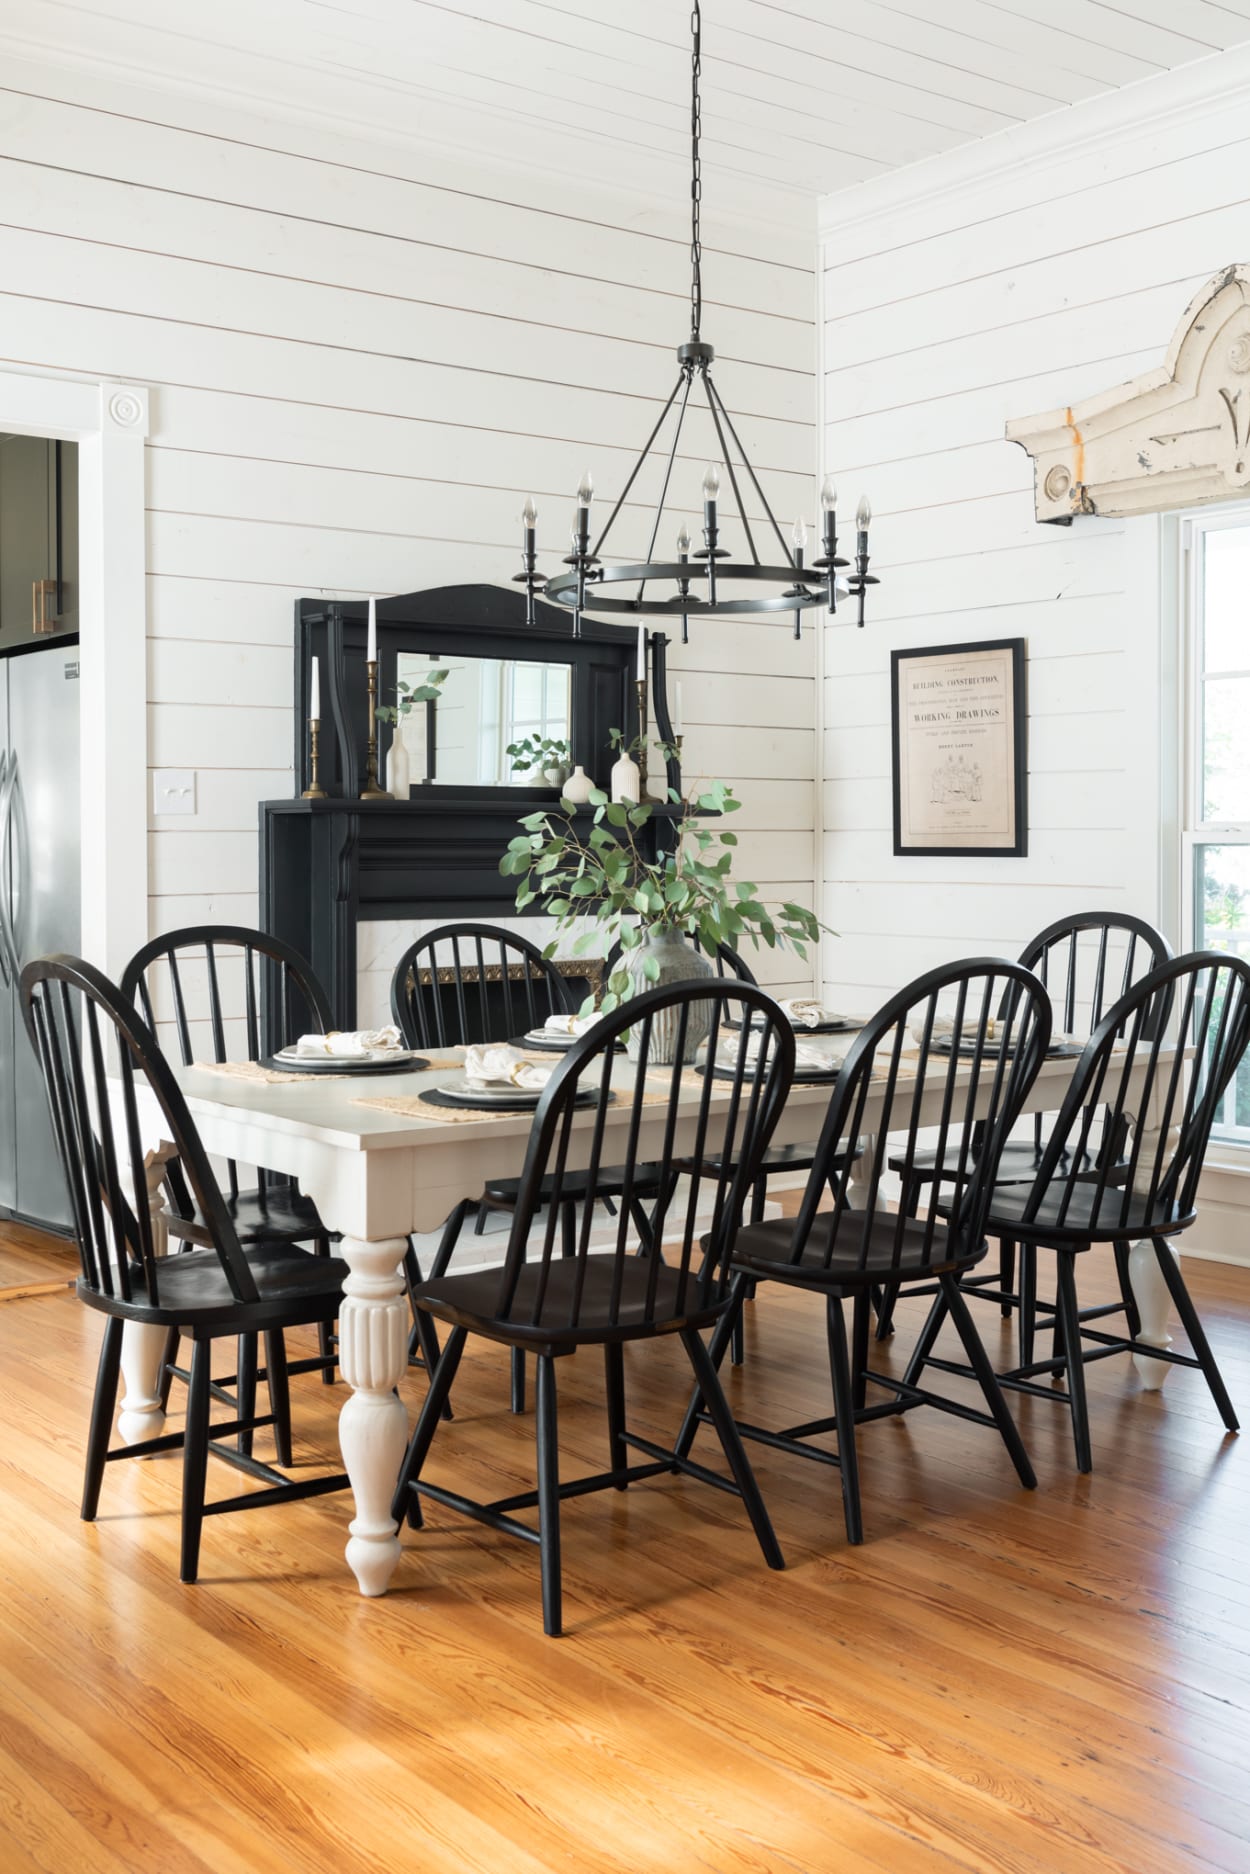 Farmhouse style dining room with shiplap walls, black painted fireplace and chairs, and white farm table - Magnolia House in McGregor, TX.